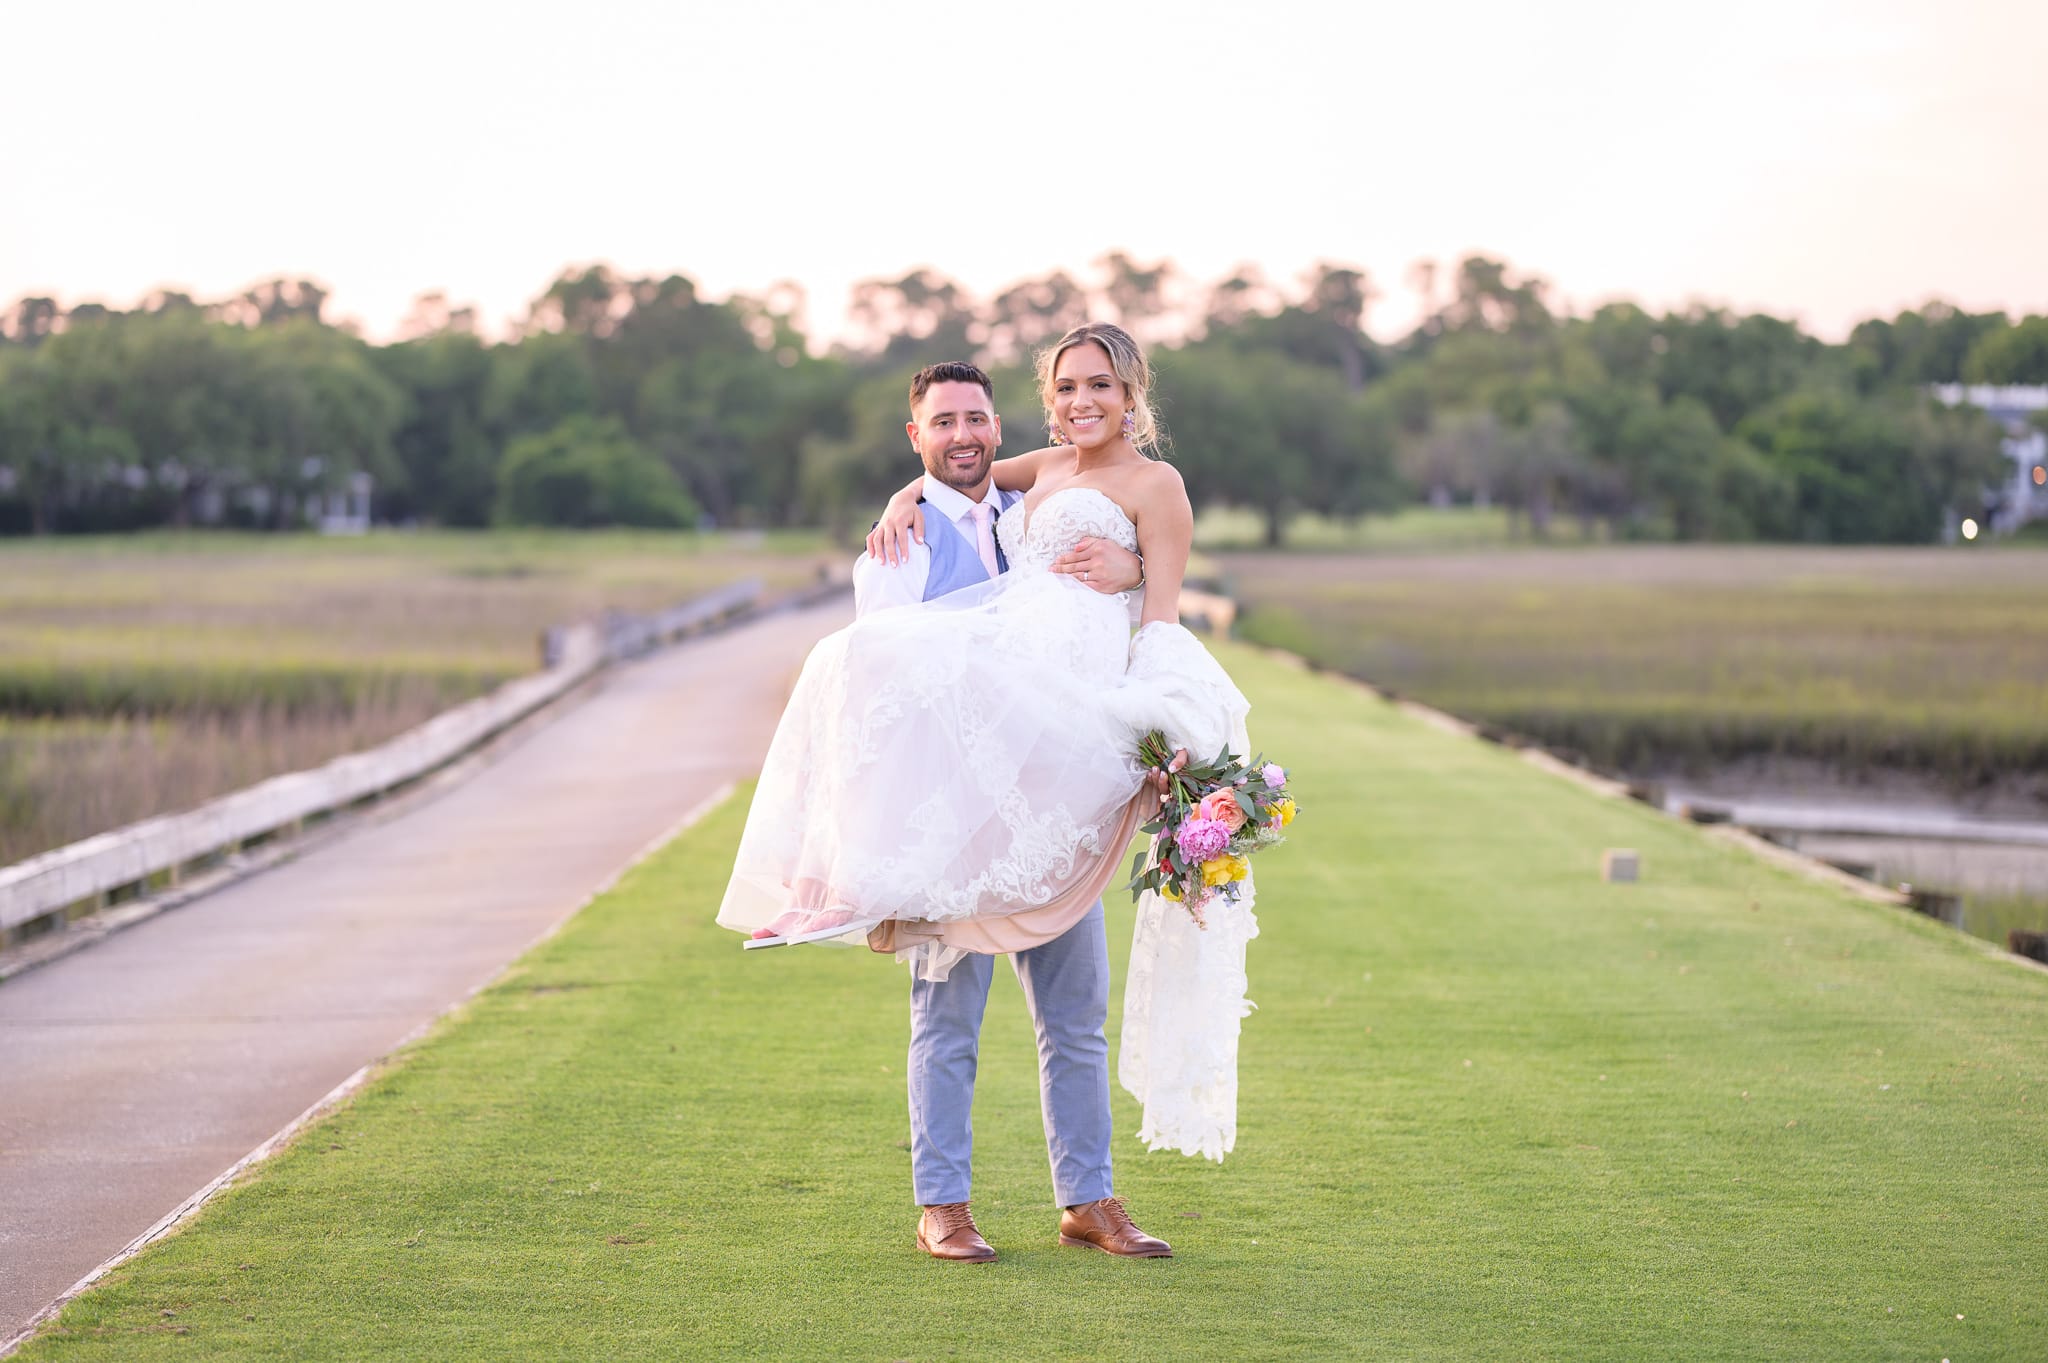 Groom carrying bride on the golf course - Pawleys Plantation Golf & Country Club